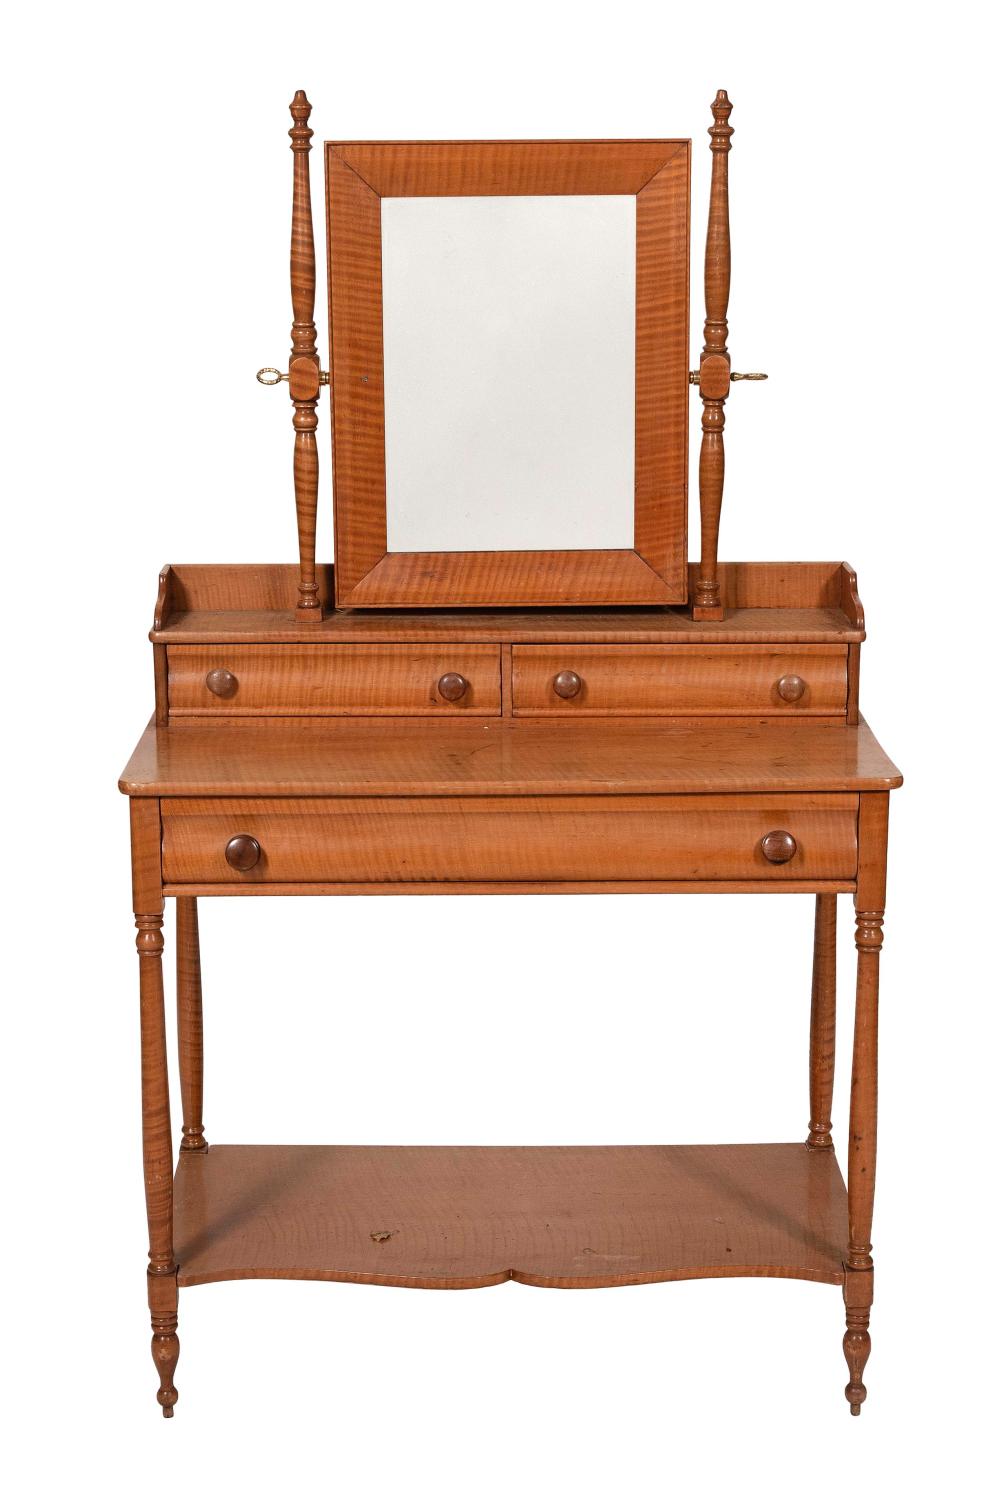 DRESSING TABLE 19TH CENTURY HEIGHT